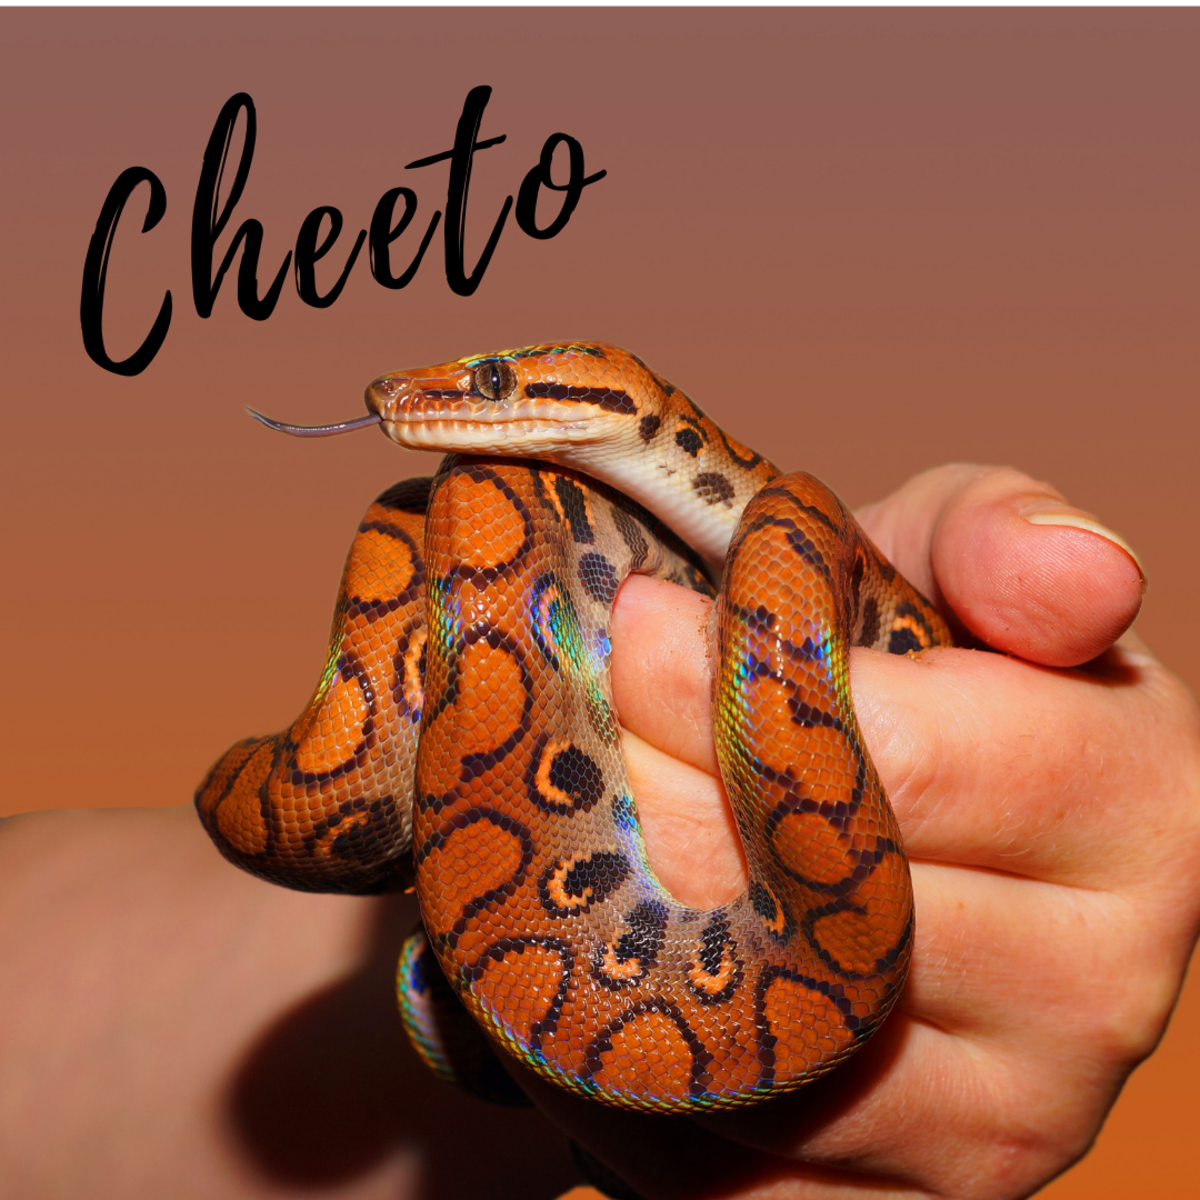 250+ Funny, Cool, Cute, and Badass Pet Snake Names - PetHelpful